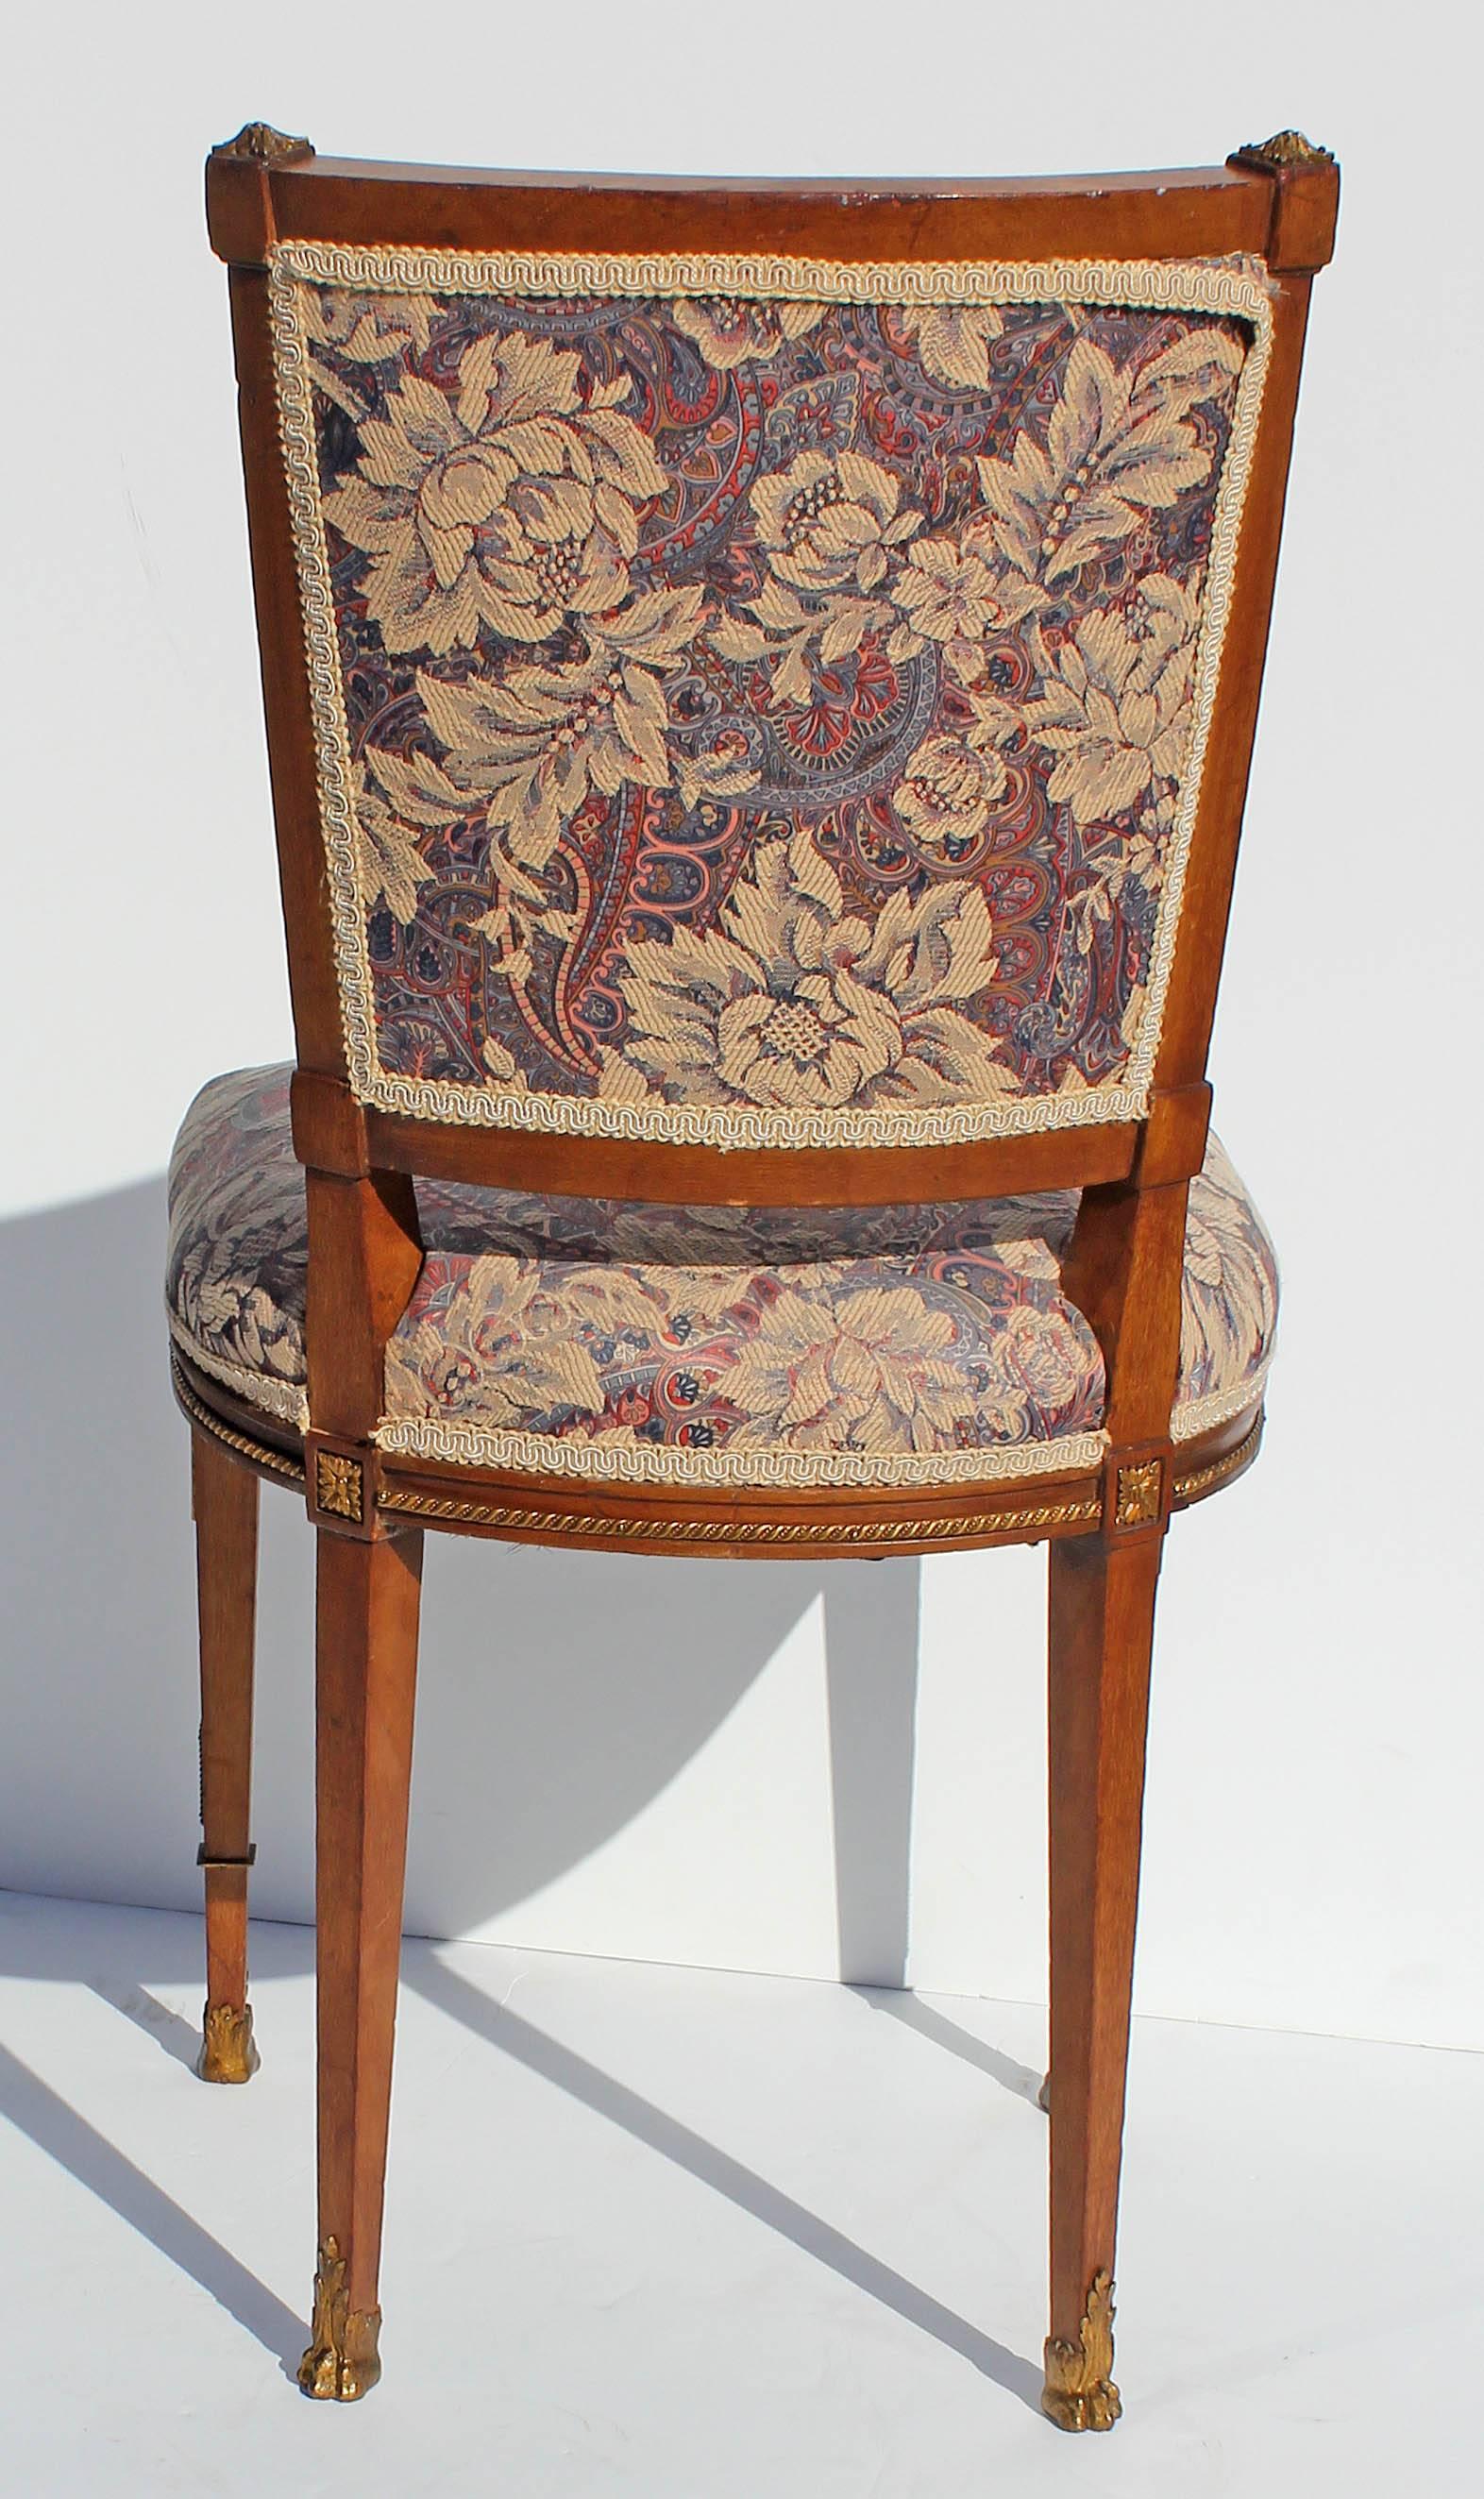 Antique petite French Louis XVI boudoir style side chair. Fruitwood with gilt mounts, late 19th century.